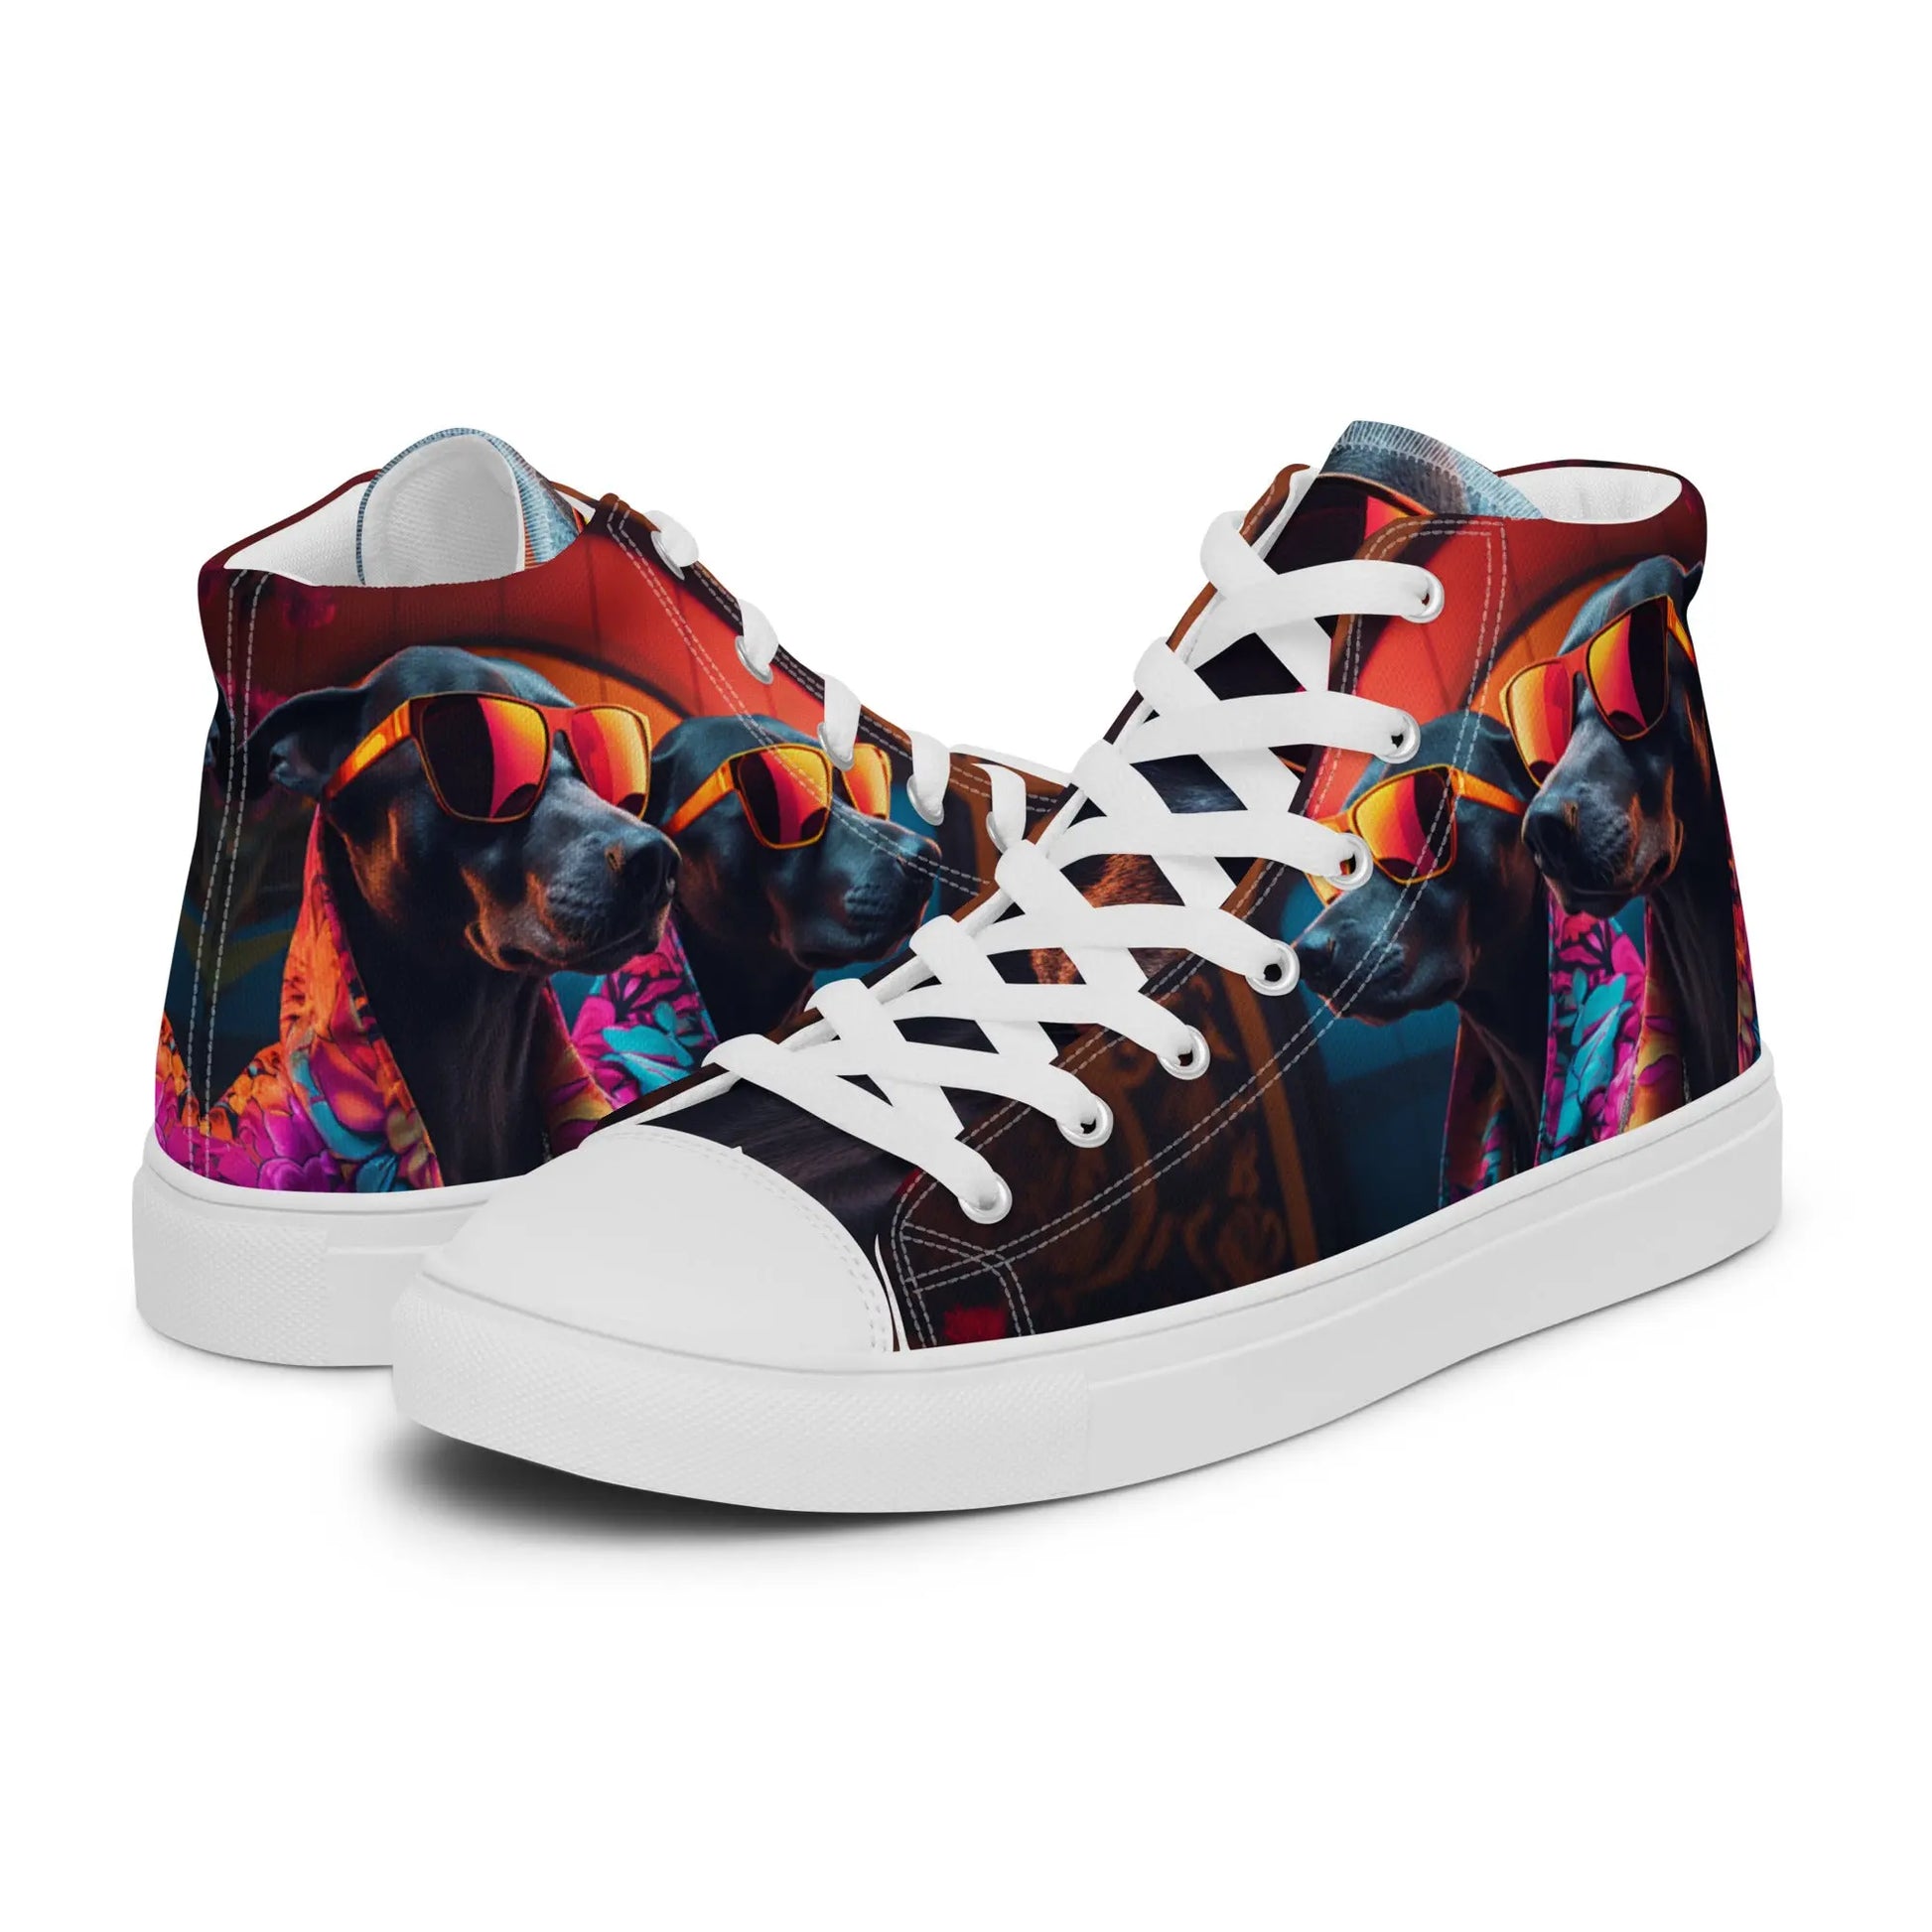 Vibrant Whimsy Suburban Garden Dog High Top Sneakers - AI-Engineered Unisex Footwear with Synthwave Flair and Whimsical Ankara Design Kinetic Footwear